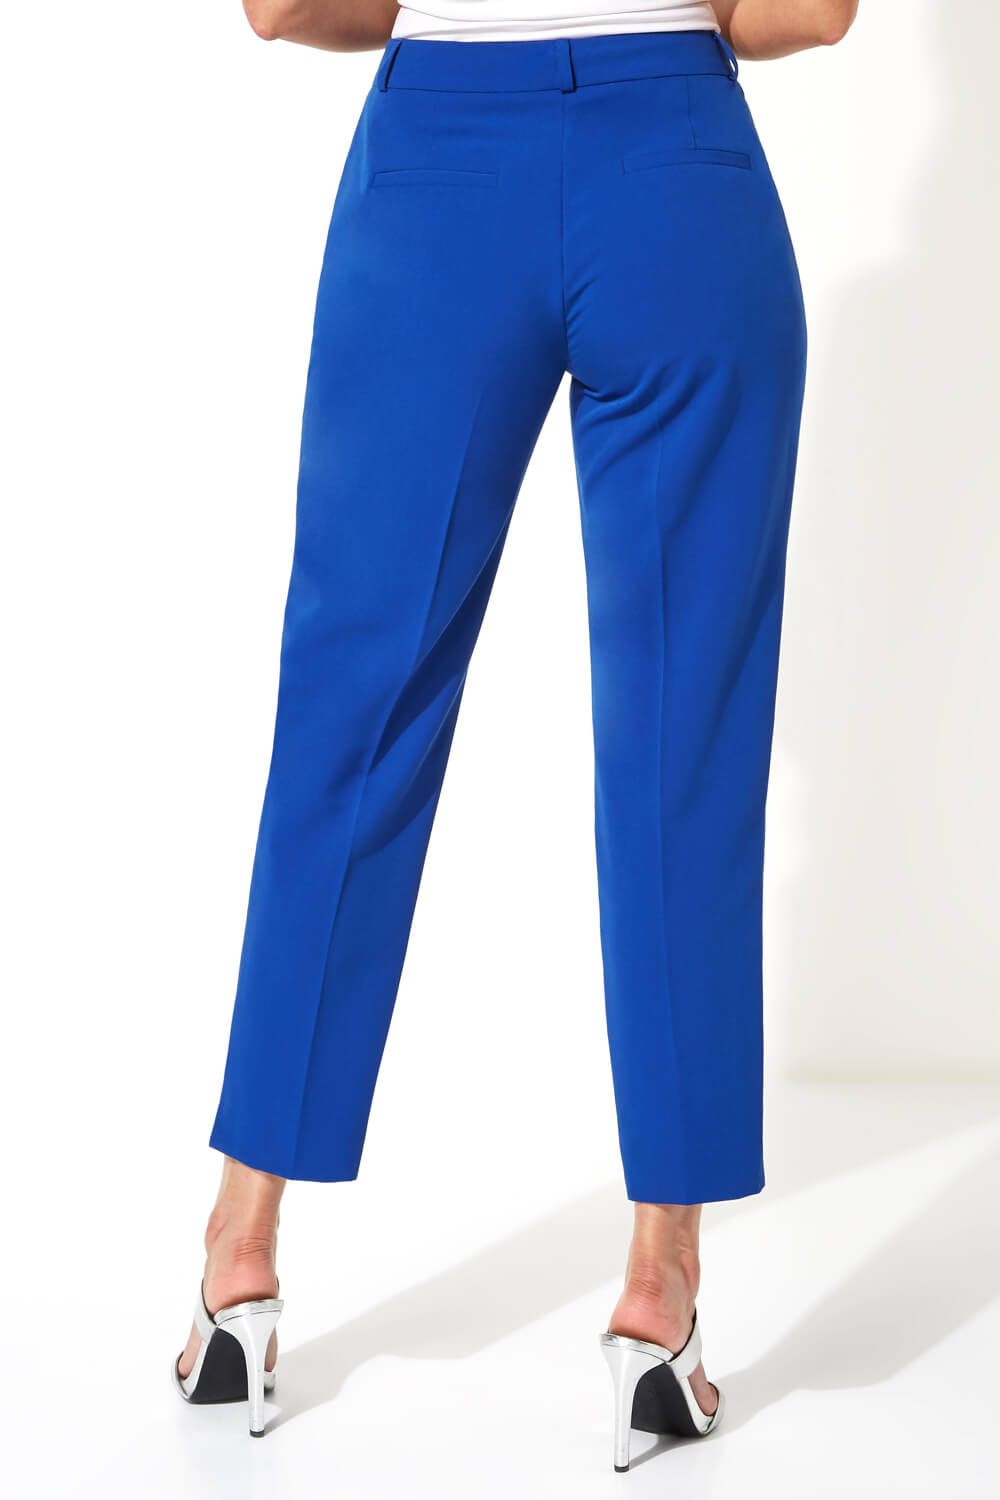 Vintage Loose Cobalt Blue Suit Womens Set Formal Business Jacket And Pencil  Pants With Blazer Casual And Comfortable Two Piece Outfit For Ladies Style  221008 From Mu01, $53.87 | DHgate.Com